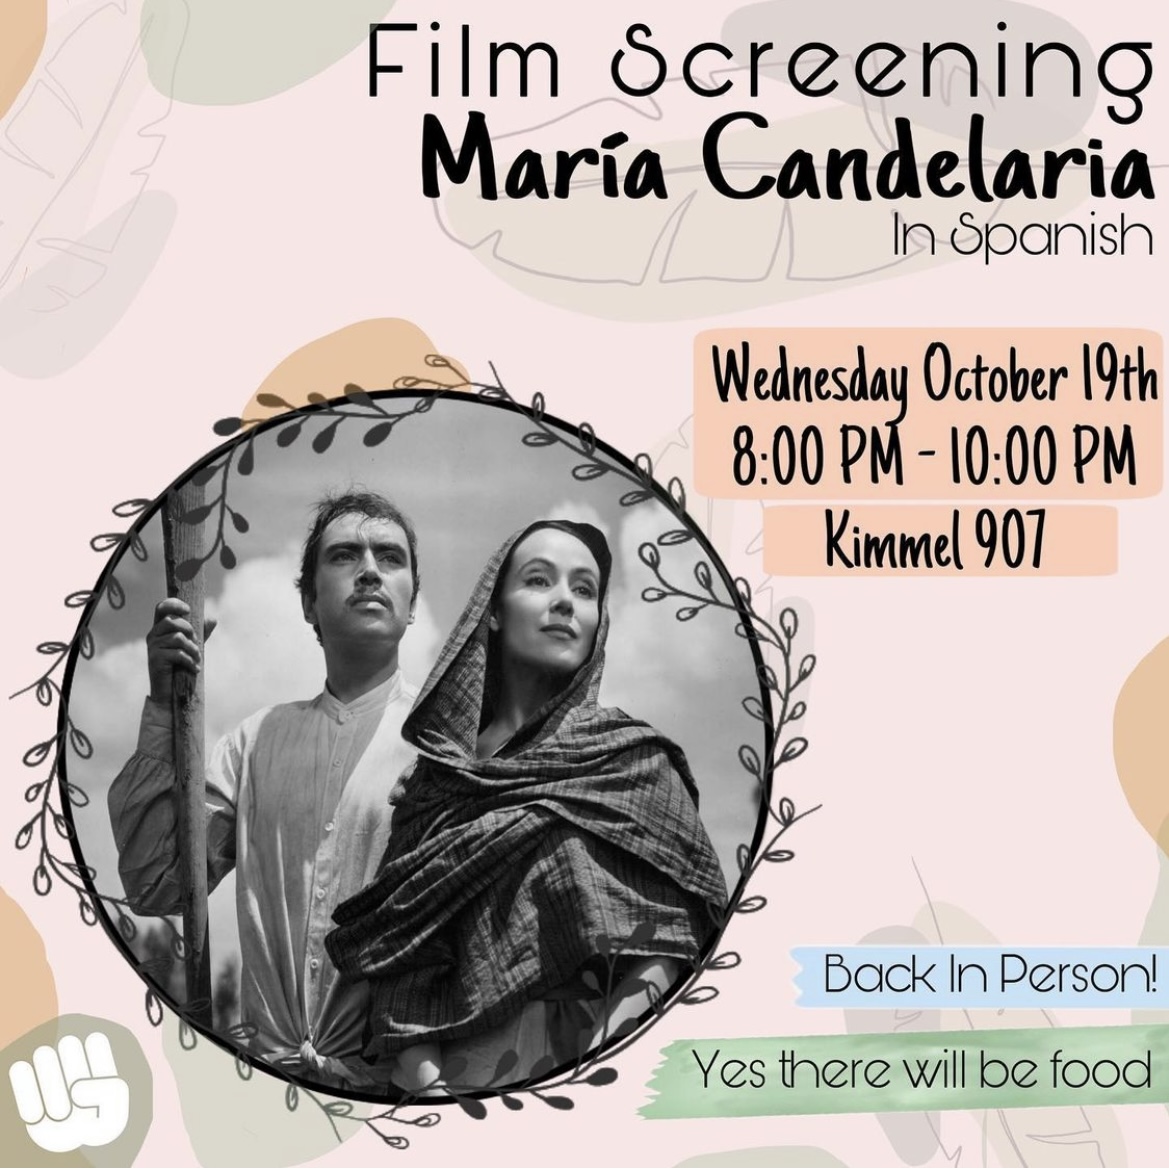 The poster for a LUCHA event, where the film “María Candelaria” was screened.